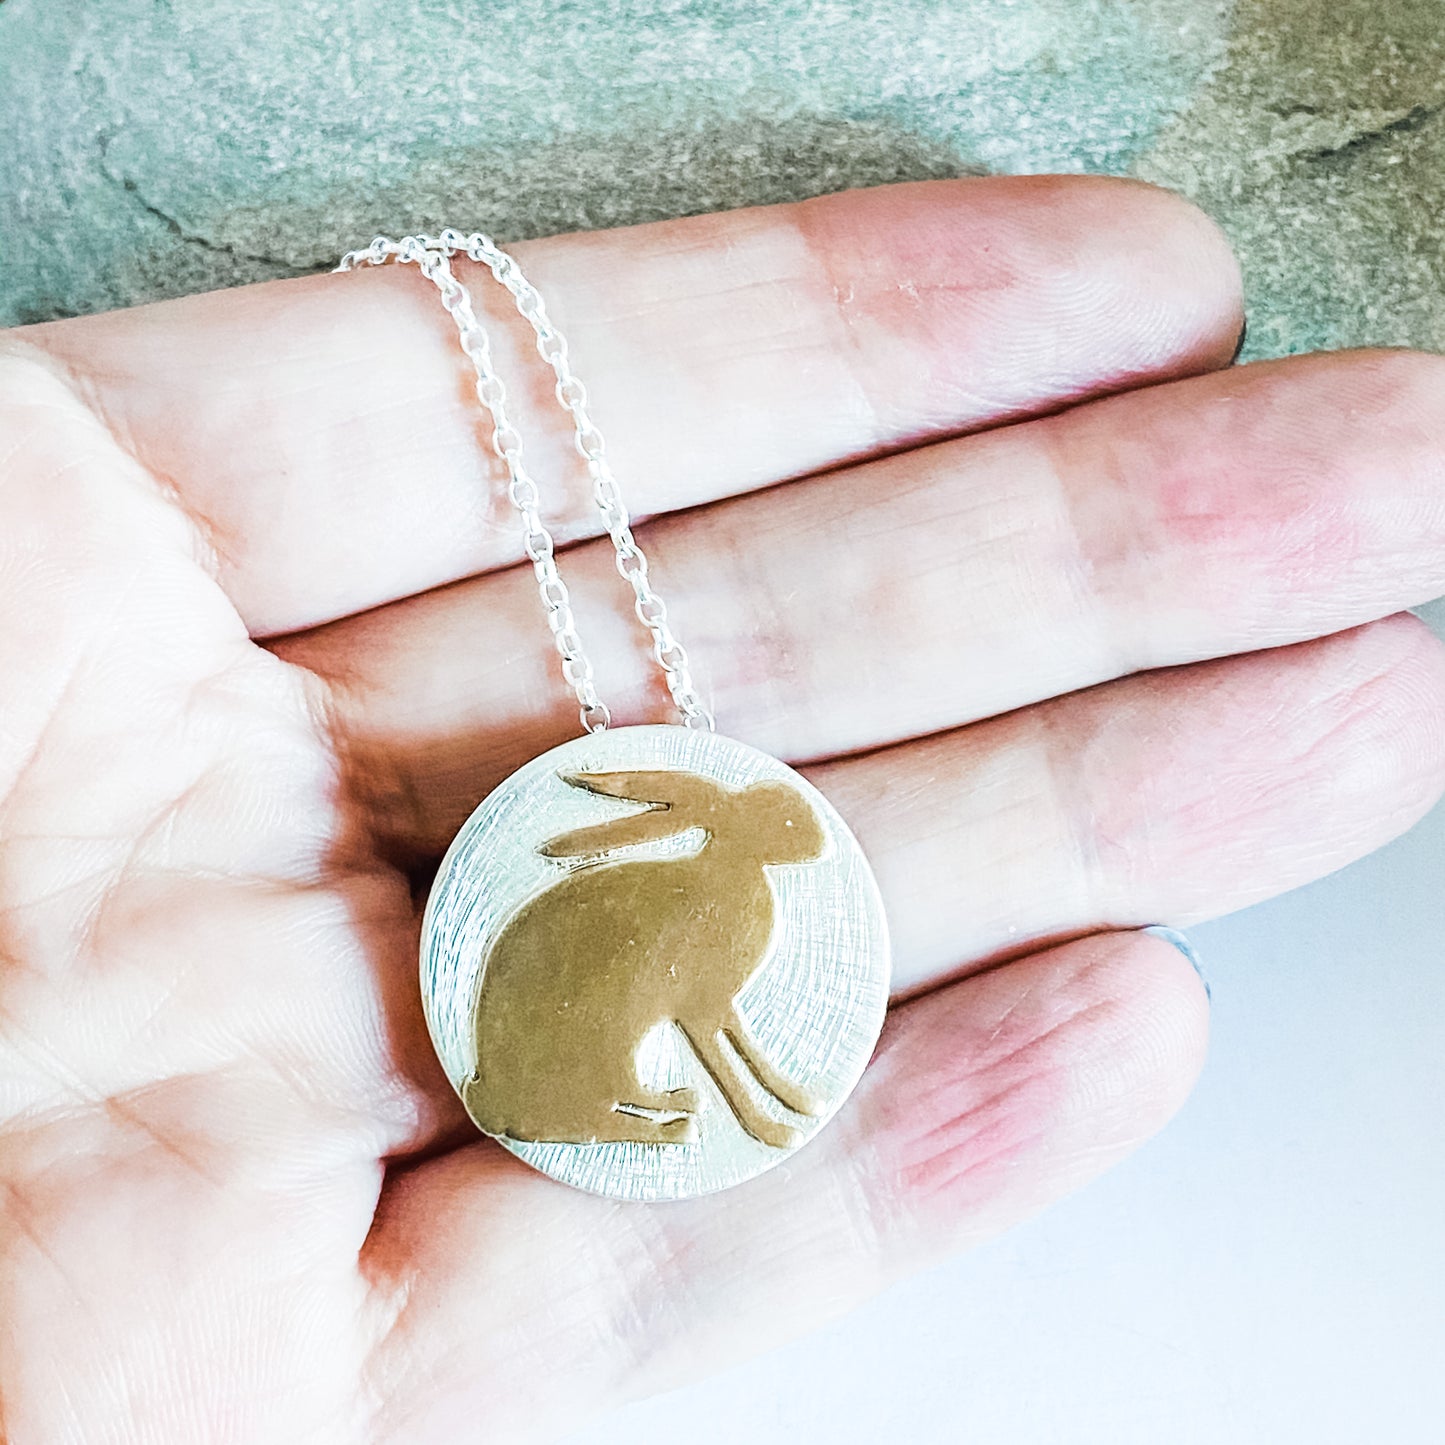 Golden Hare, Necklace, Small Dog Silver